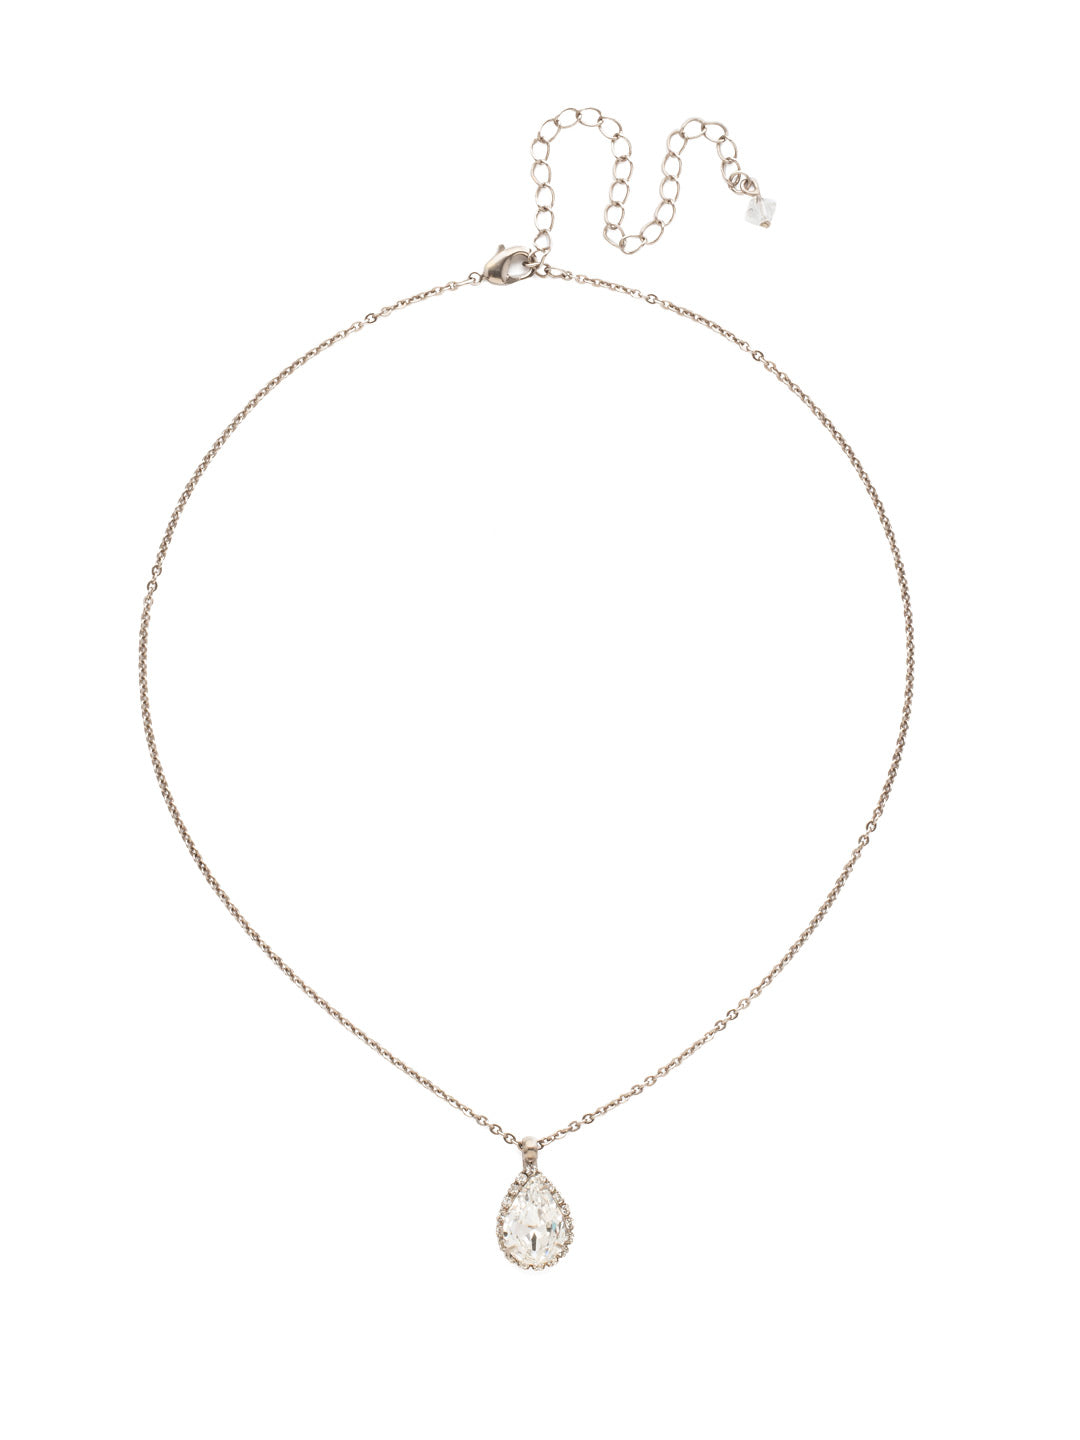 Rain Droplet  Necklace - NDY16ASCRY - <p>A delicate pear shaped crystal with a decorative rhinestone border adds just the right amount of sparkle and shine! From Sorrelli's Crystal collection in our Antique Silver-tone finish.</p>